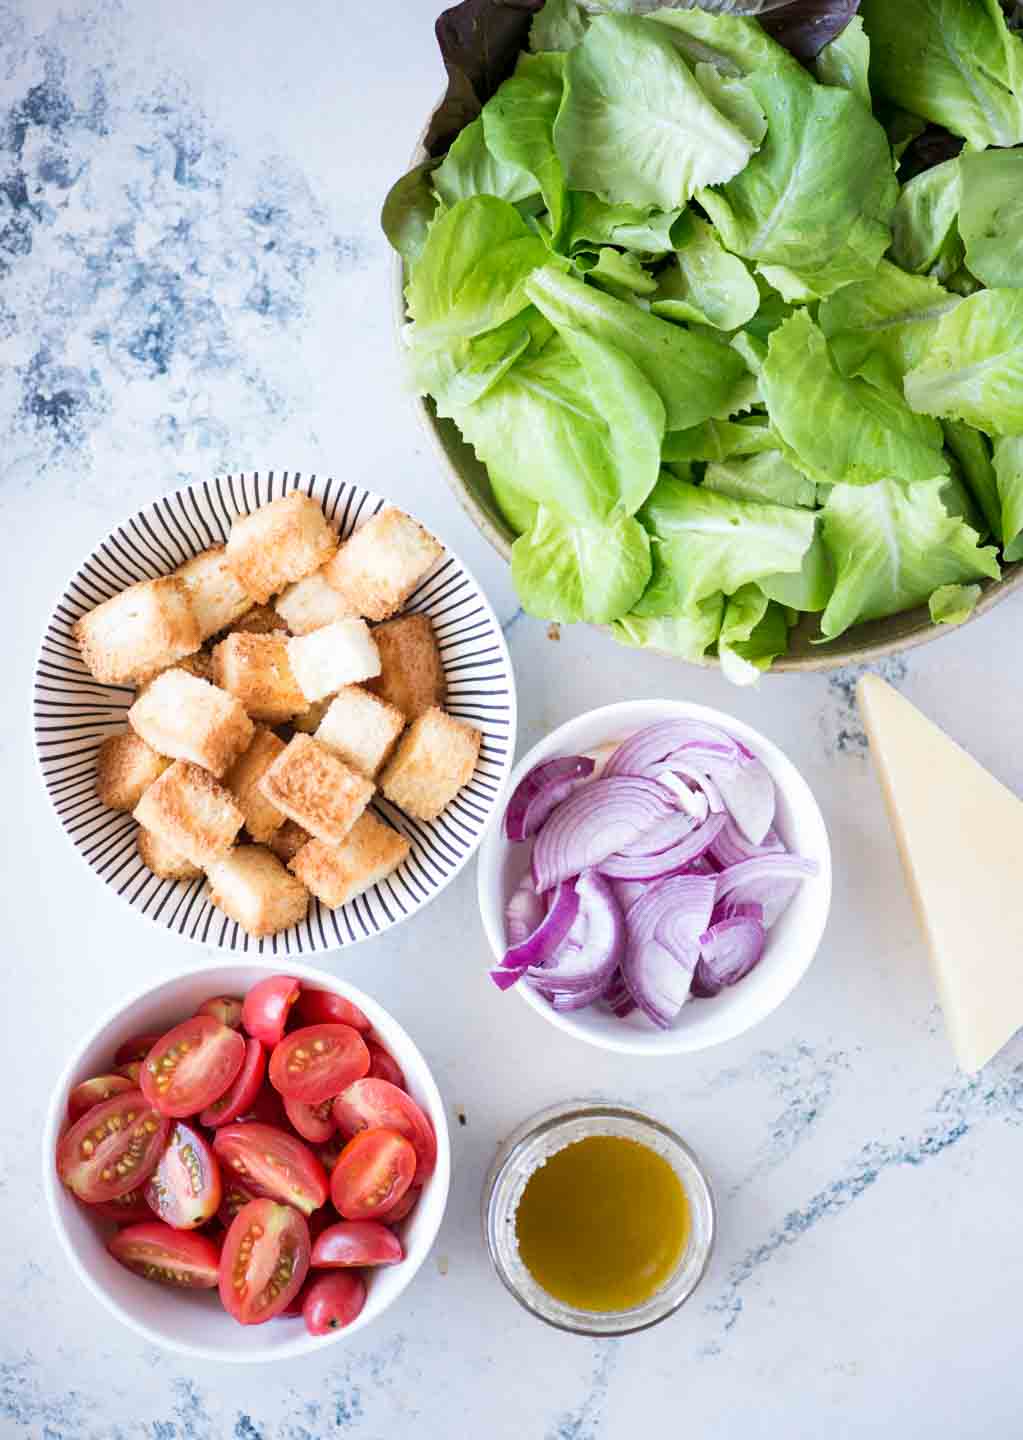 Chopped lettuce, cherr tomatoes, sliced onion, croutons, olive oil and parmesan cheese block shown as ingredients required to make Italian chopped salad.